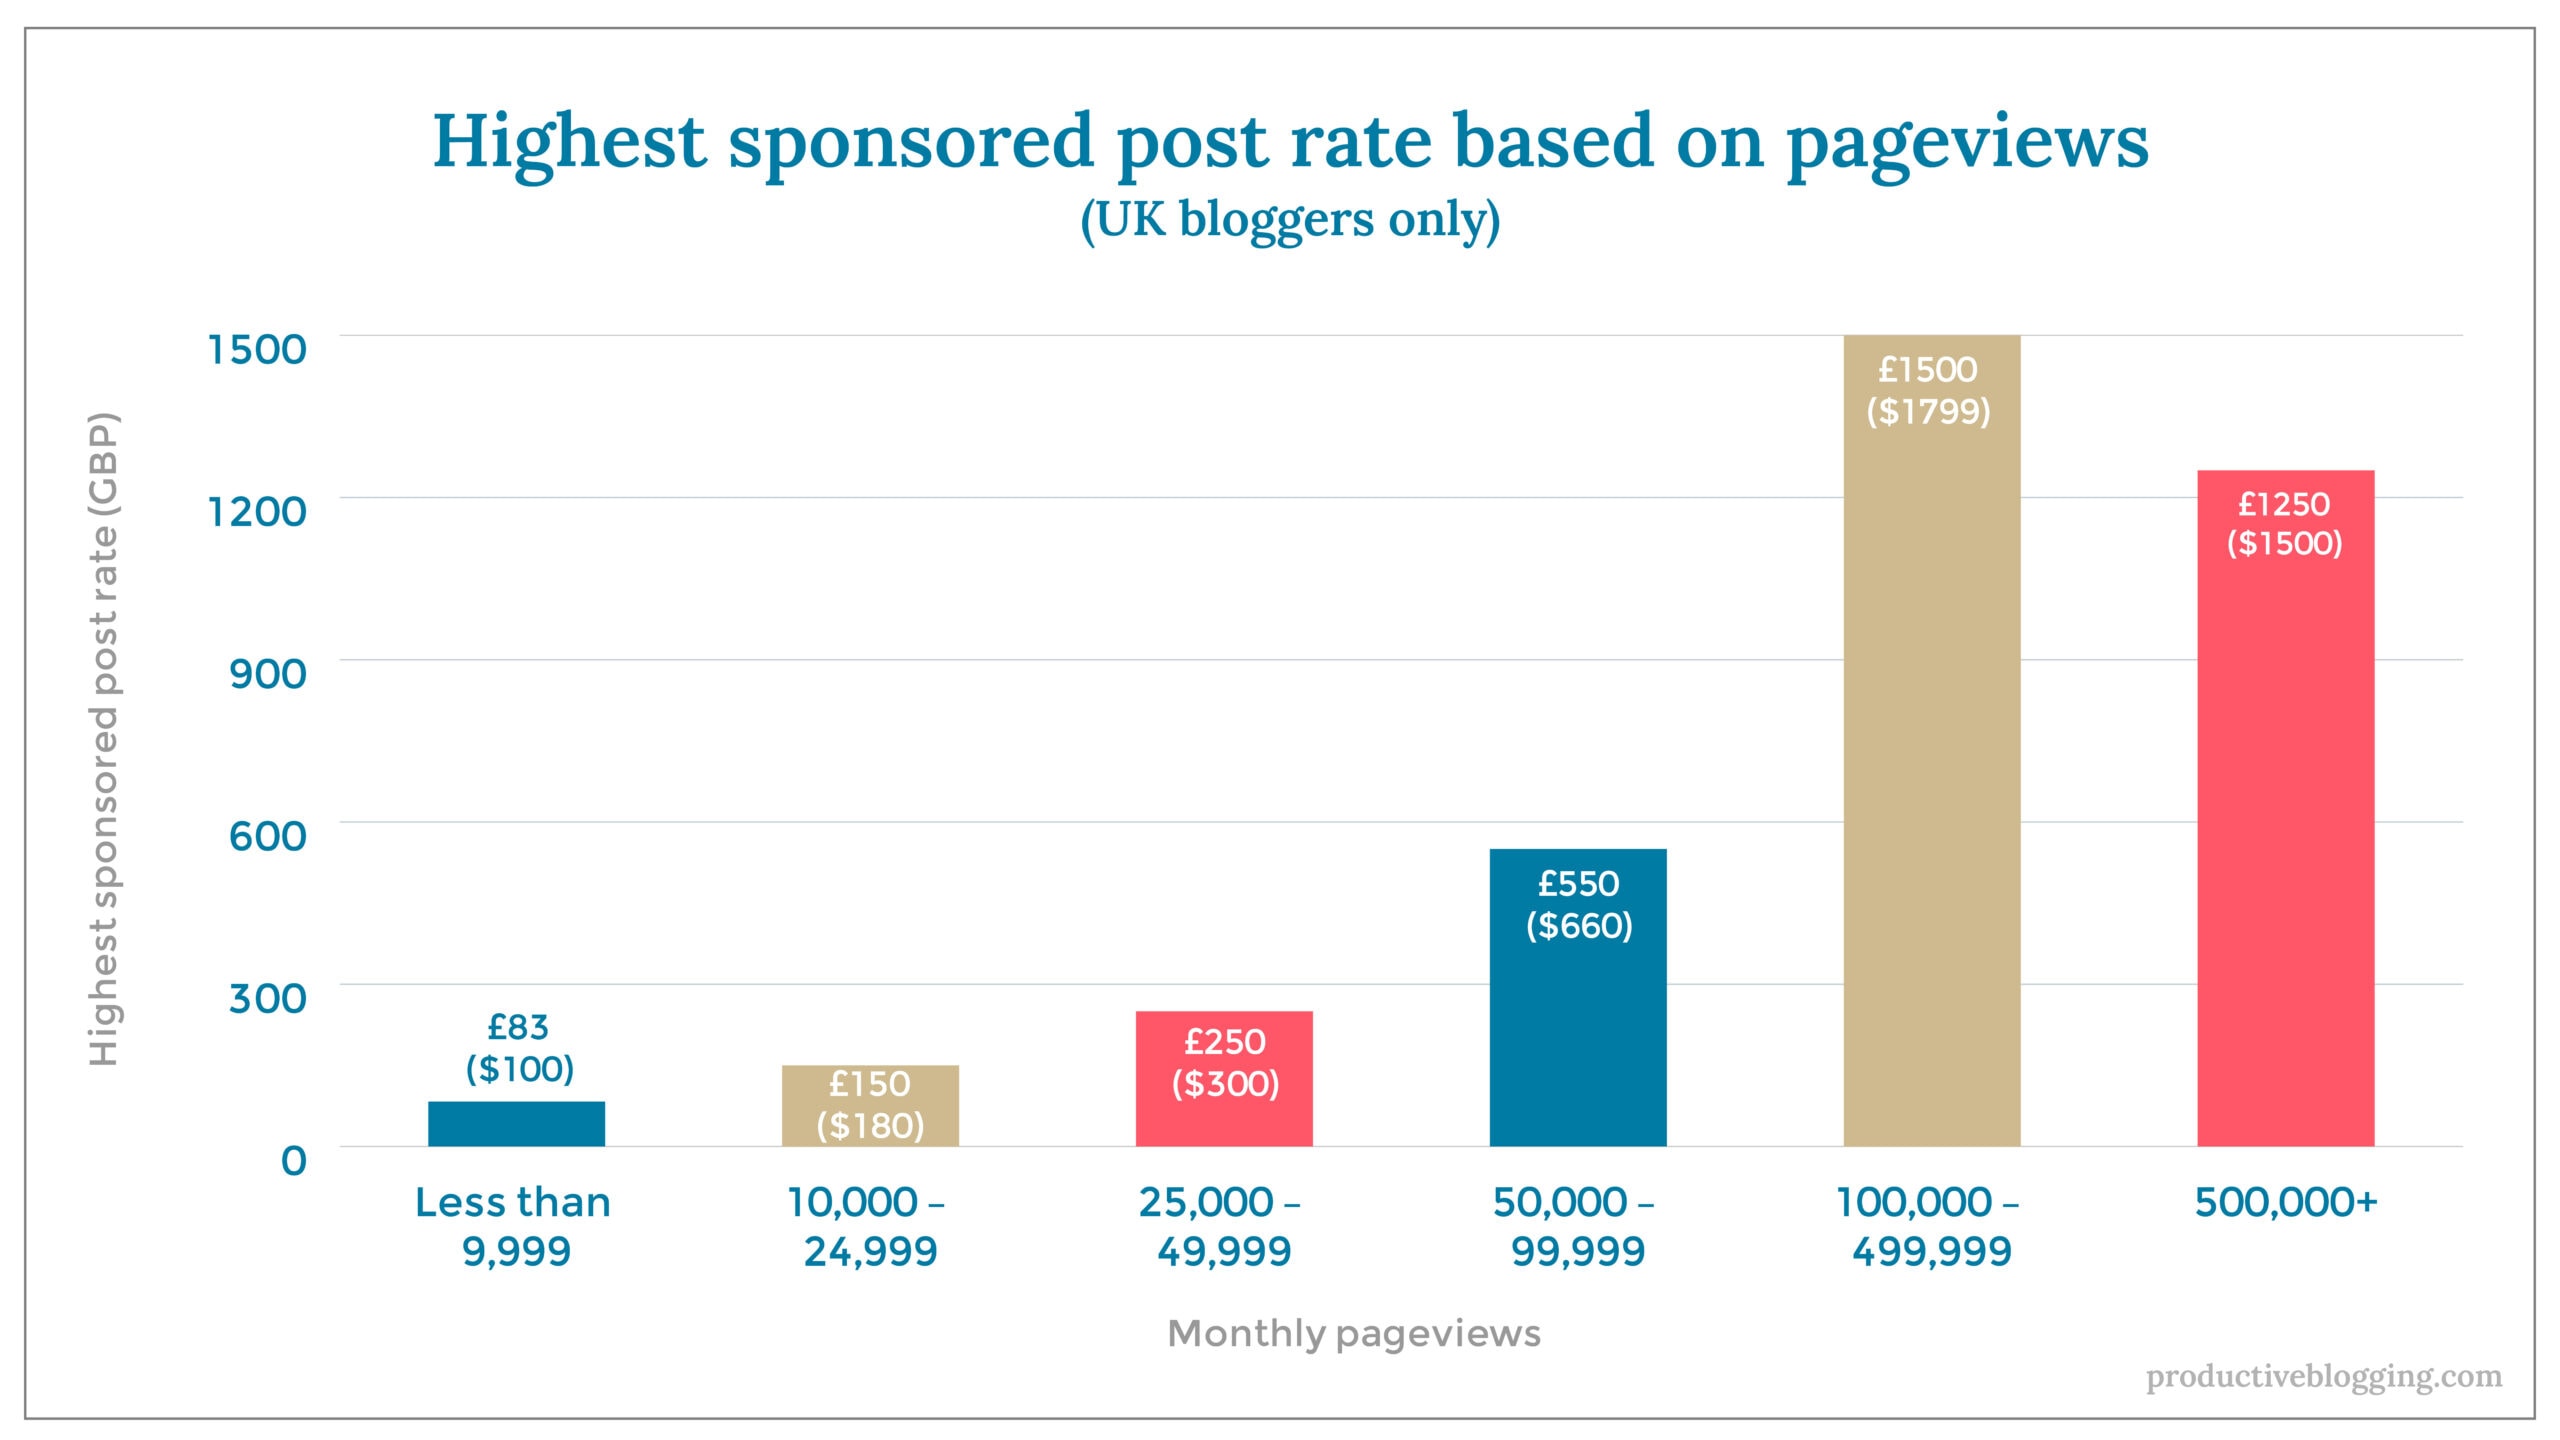 Highest sponsored post rate based on pageviews (UK)X axis: Monthly pageviewsY axis: Highest sponsored post rate (GBP)Less than 9,999		£83 ($100)10,000 – 24,999		£150 ($180)25,000 – 49,999		£250 ($300)50,000 – 99,999		£550 ($660)100,000 – 499,999	£1500 ($1799)500,000+		£1250 ($1500)